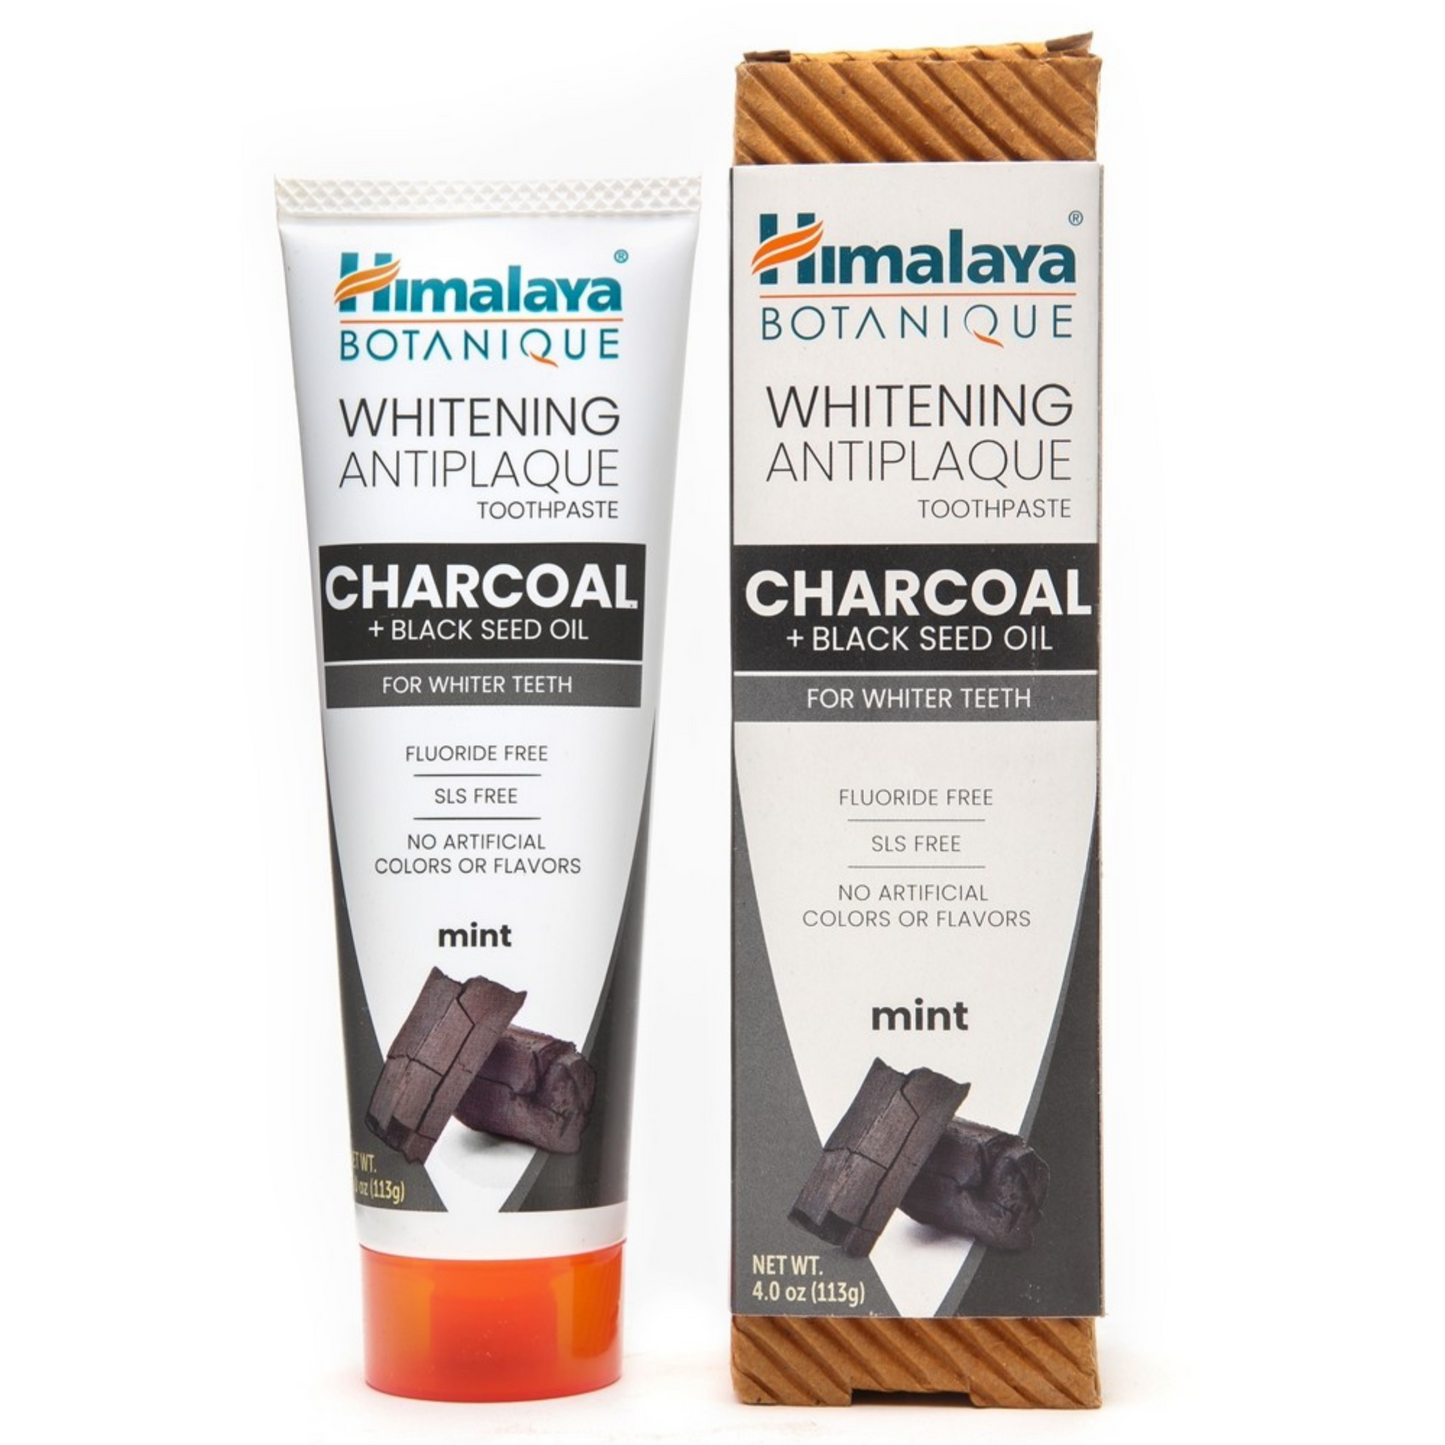 Primary Image of Charcoal and Black Seed Oil Toothpaste